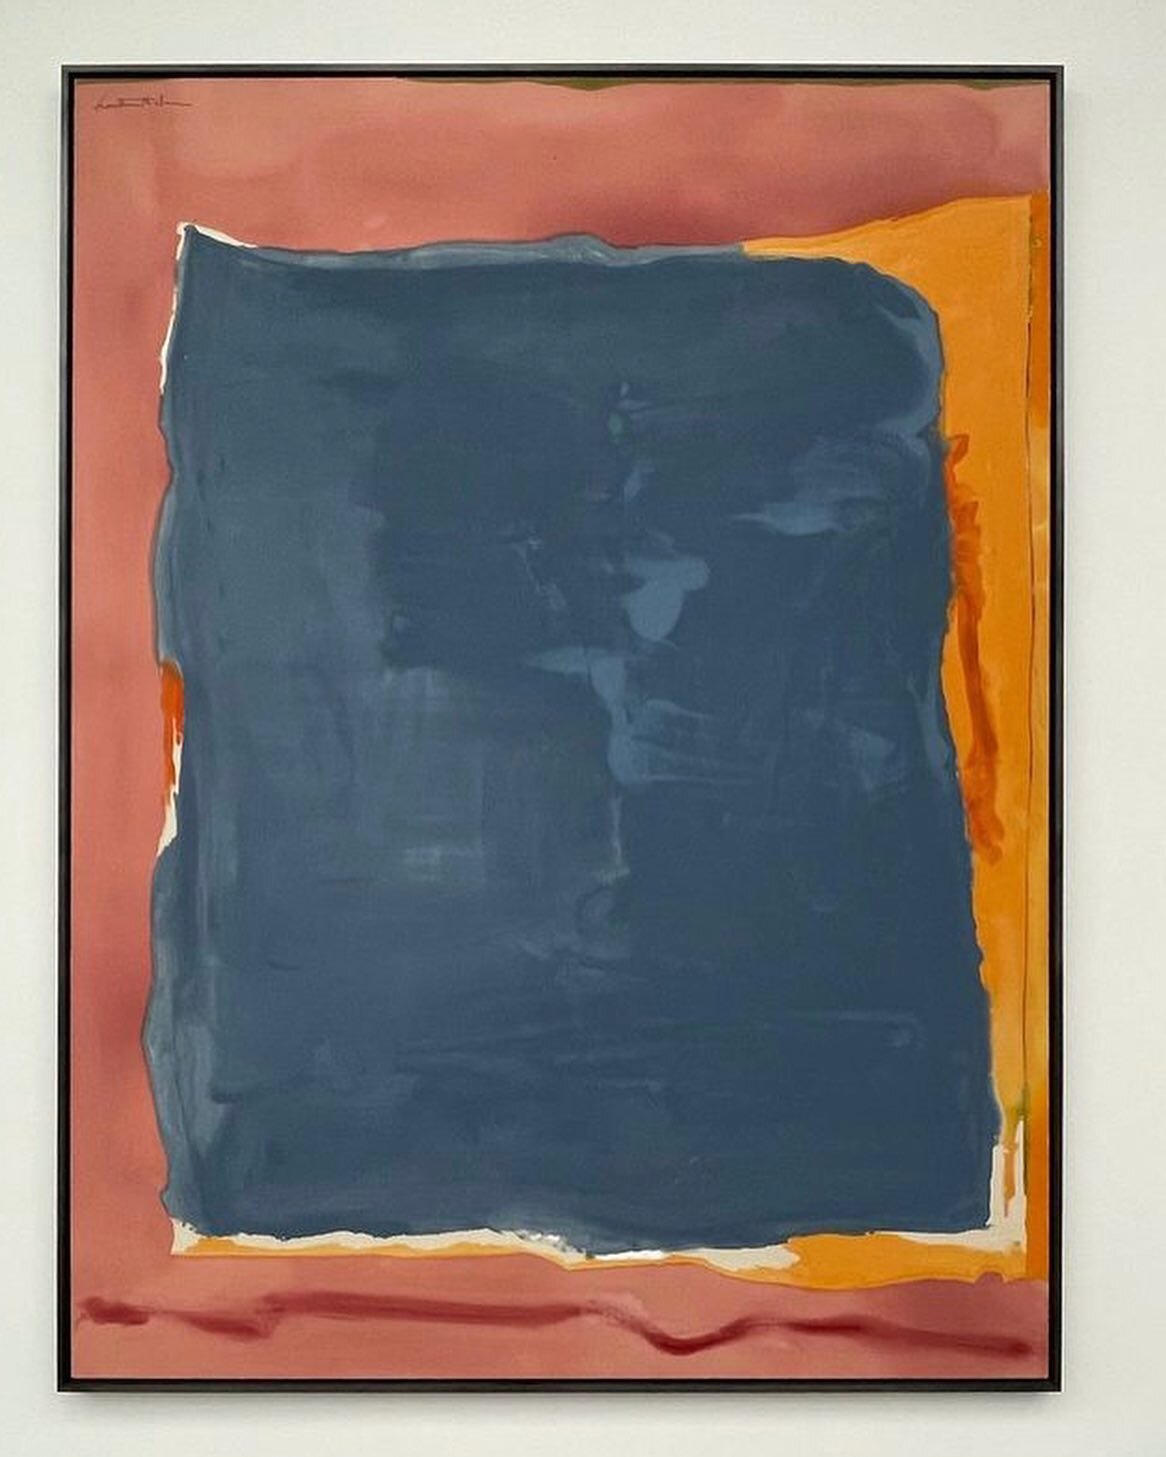 &ldquo;Imagining Landscapes&rdquo; by Helen Frankenthaler @gagosian until Sept. Through the 13 different works in the exhibition you see a clear shift from the reference to landscape being subtle to explicit but her extraordinary use of colour is con